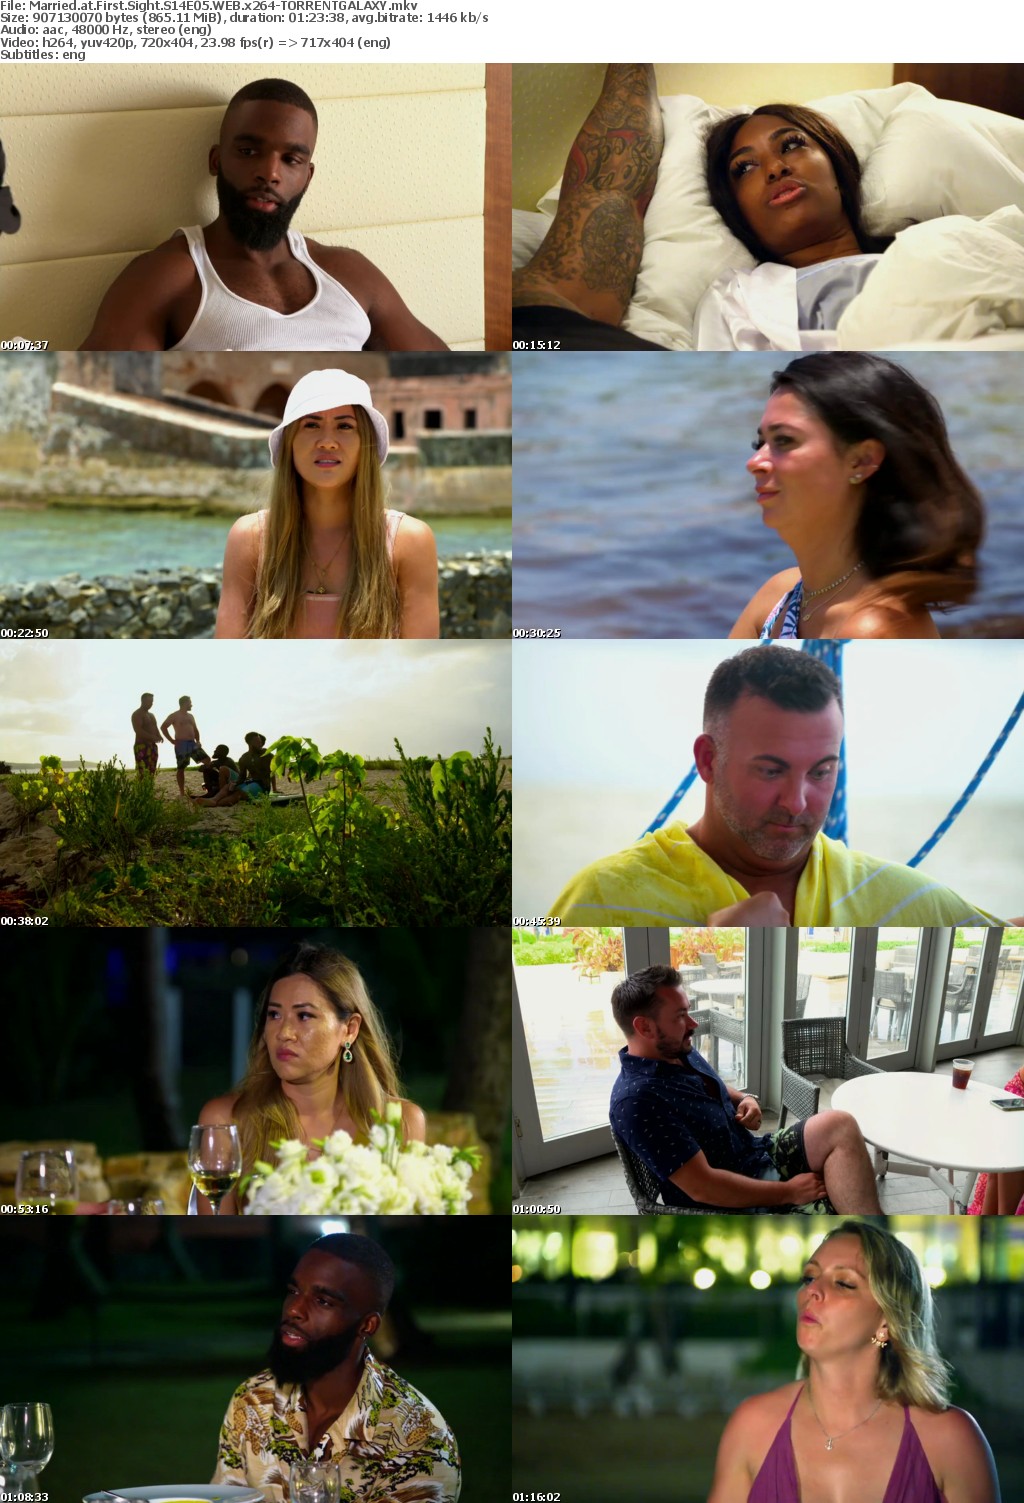 Married at First Sight S14E05 WEB x264-GALAXY